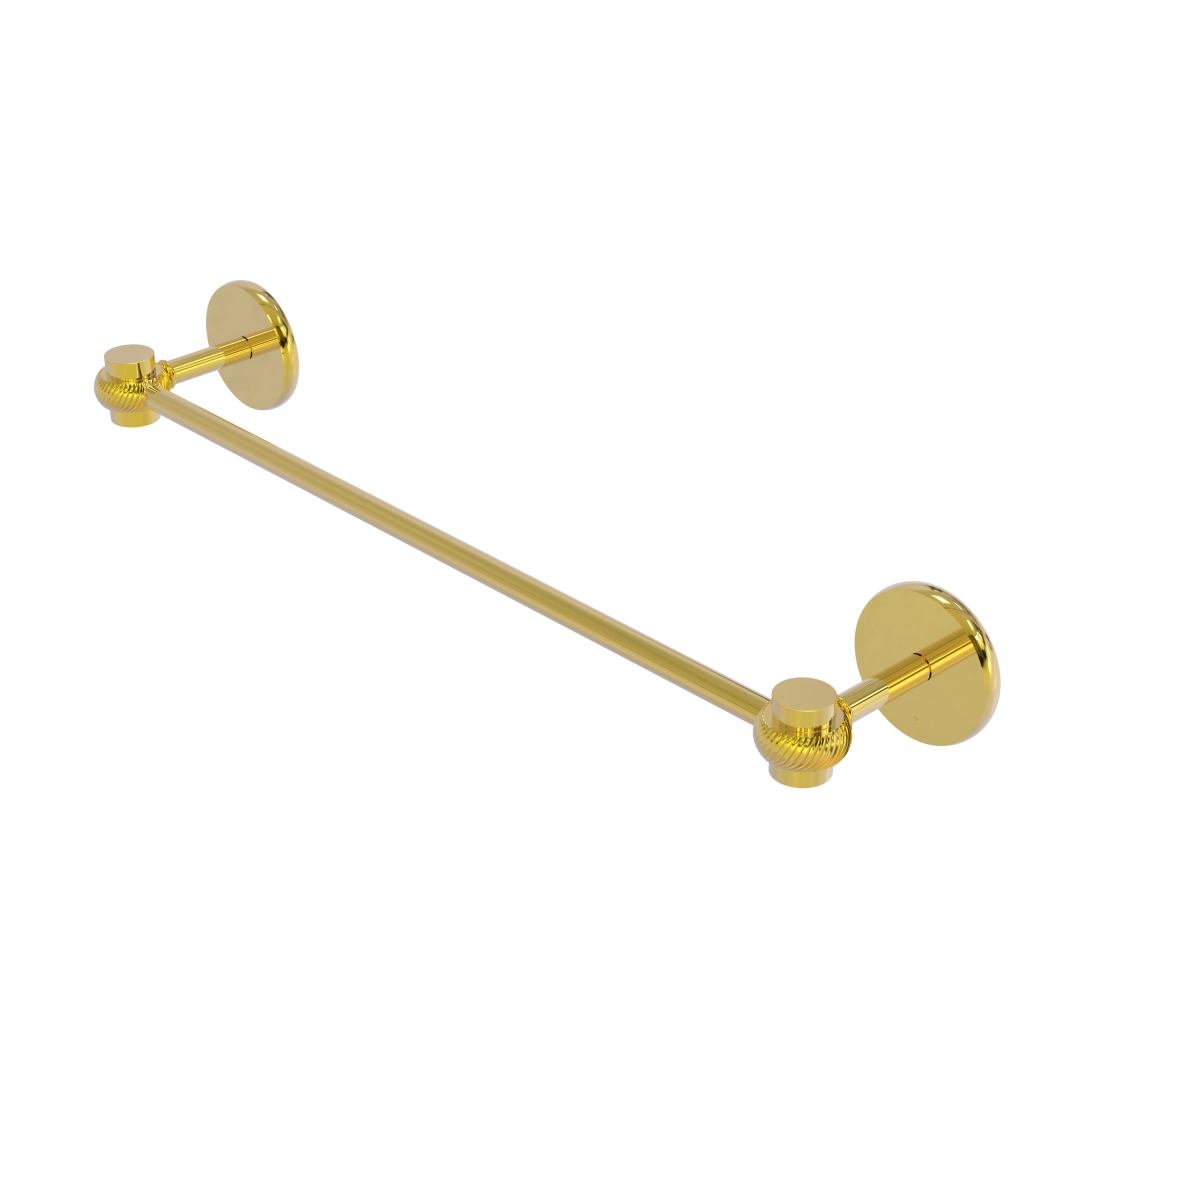 Allied Brass 7131T-24-PB 24 in. Satellite Orbit One Collection Towel Bar with Twist Accents, Polished Brass